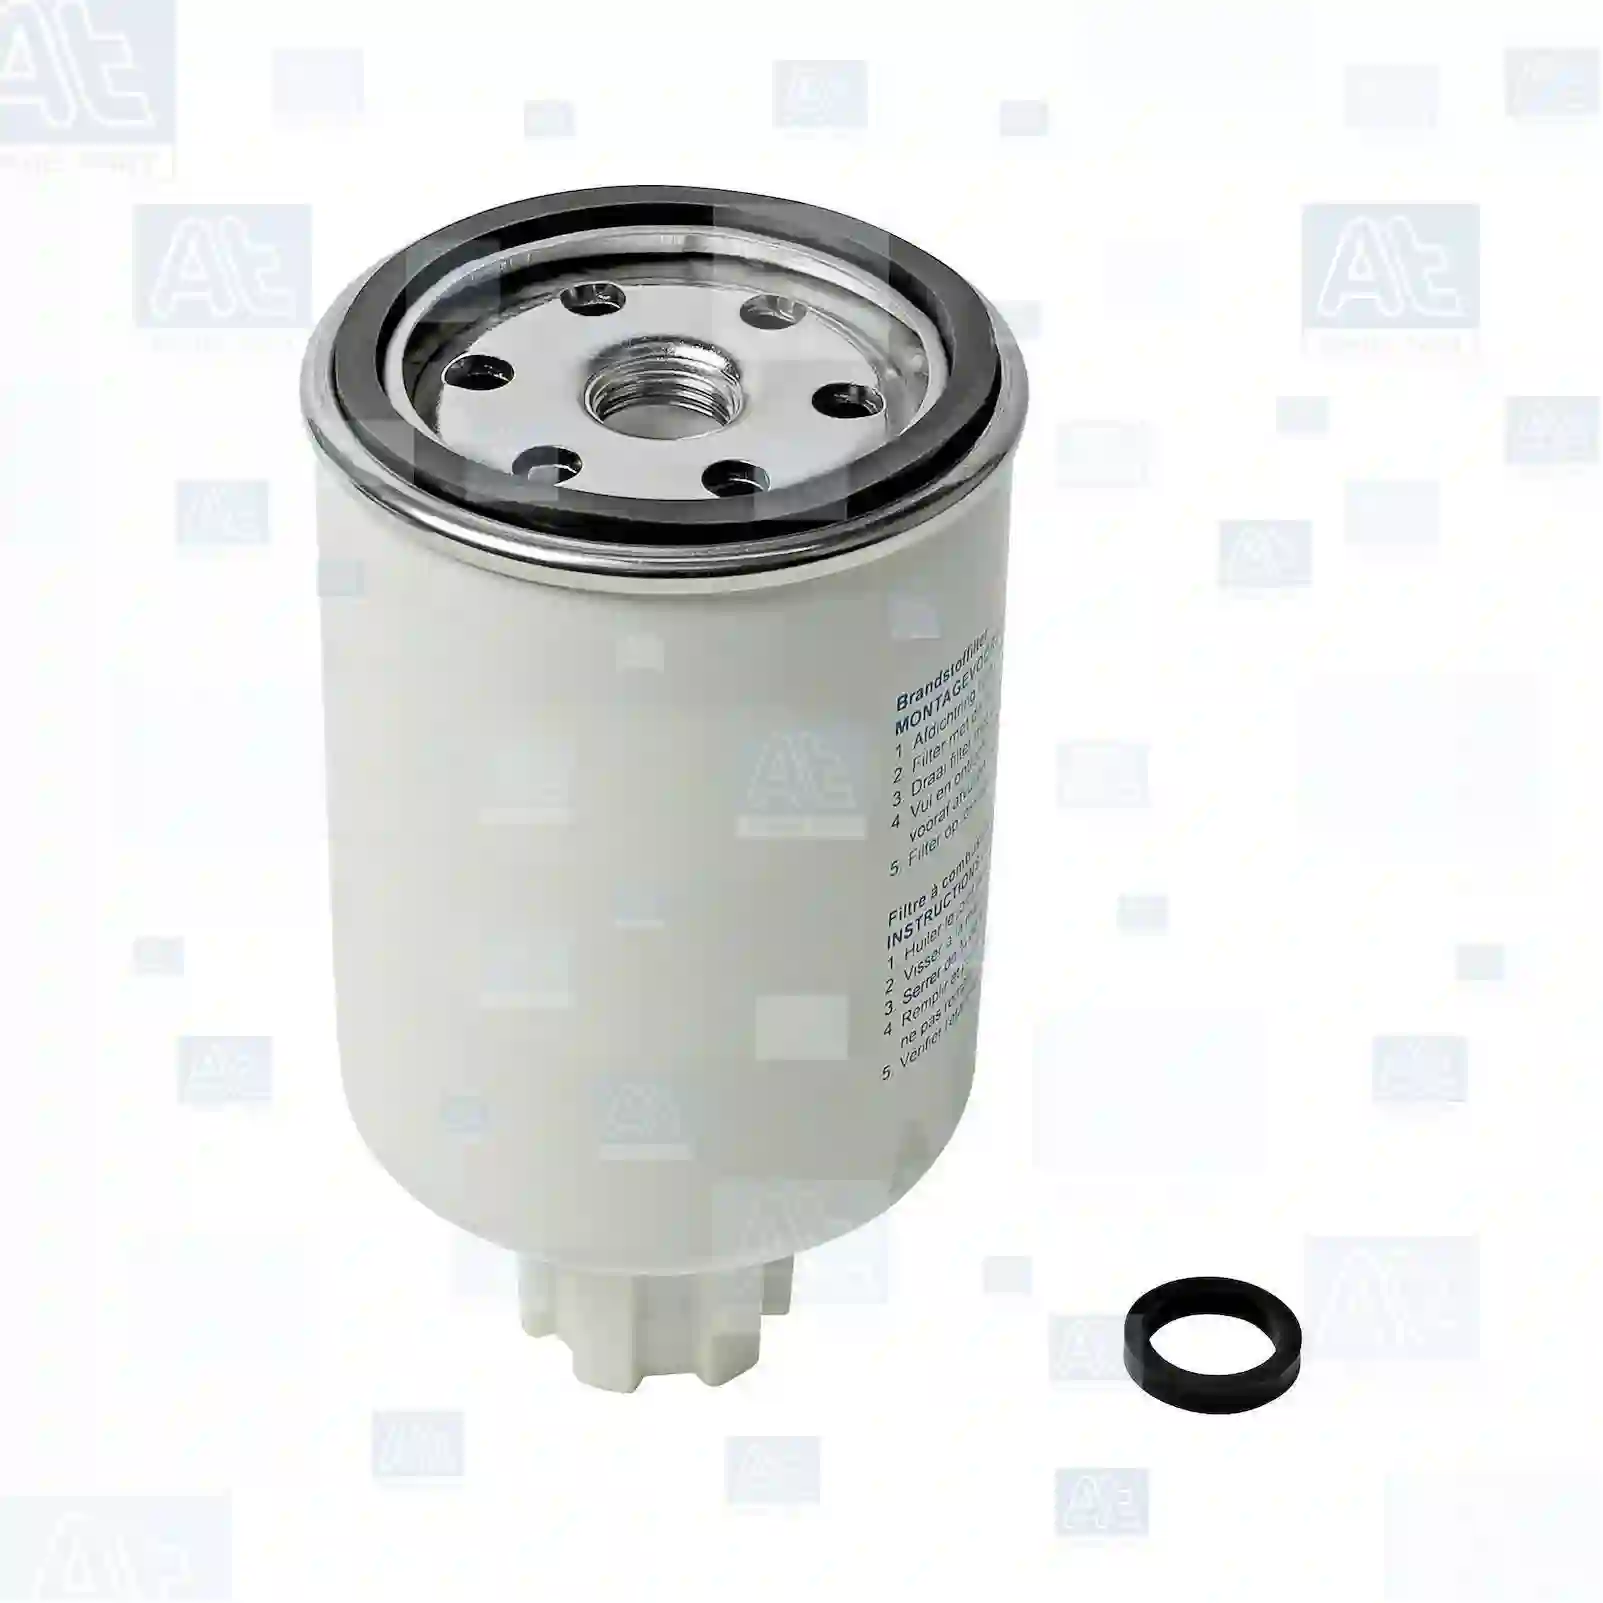 Fuel filter, 77723348, 72515734, A4027606, 813566, 90166585, 1133493R1, 114545A1, 133493, 71104220, 84229389, 86990957, J286503, J286503MP, J931063, J931962, 190626, 190661, 1906A8, 1004559, 1492827, 3286503, 3931062, 3931064, 490160, CBU1177, CBU1251, CBU1920, CVU1177, ZZ11063, 2011055, 01902138, 71736116, 73175965, 73175973, 3843760, 5018034, 5023923, DNP550248, 90166585, 90166858, 93891769, 25011999, 9414992533, 9437990108, 26561118, 01902138, 08122353, 1902138, 3903202, 51125030026, 0940000604, 3218794R91, 04785601, 71104220, 73175965, 84229389, 86990957, 190626, 190661, 1906A8, 90111090900, 5001850947, 83129993490, 15270824, 1257201, 3134055, 829993, ZG10129-0008 ||  77723348 At Spare Part | Engine, Accelerator Pedal, Camshaft, Connecting Rod, Crankcase, Crankshaft, Cylinder Head, Engine Suspension Mountings, Exhaust Manifold, Exhaust Gas Recirculation, Filter Kits, Flywheel Housing, General Overhaul Kits, Engine, Intake Manifold, Oil Cleaner, Oil Cooler, Oil Filter, Oil Pump, Oil Sump, Piston & Liner, Sensor & Switch, Timing Case, Turbocharger, Cooling System, Belt Tensioner, Coolant Filter, Coolant Pipe, Corrosion Prevention Agent, Drive, Expansion Tank, Fan, Intercooler, Monitors & Gauges, Radiator, Thermostat, V-Belt / Timing belt, Water Pump, Fuel System, Electronical Injector Unit, Feed Pump, Fuel Filter, cpl., Fuel Gauge Sender,  Fuel Line, Fuel Pump, Fuel Tank, Injection Line Kit, Injection Pump, Exhaust System, Clutch & Pedal, Gearbox, Propeller Shaft, Axles, Brake System, Hubs & Wheels, Suspension, Leaf Spring, Universal Parts / Accessories, Steering, Electrical System, Cabin Fuel filter, 77723348, 72515734, A4027606, 813566, 90166585, 1133493R1, 114545A1, 133493, 71104220, 84229389, 86990957, J286503, J286503MP, J931063, J931962, 190626, 190661, 1906A8, 1004559, 1492827, 3286503, 3931062, 3931064, 490160, CBU1177, CBU1251, CBU1920, CVU1177, ZZ11063, 2011055, 01902138, 71736116, 73175965, 73175973, 3843760, 5018034, 5023923, DNP550248, 90166585, 90166858, 93891769, 25011999, 9414992533, 9437990108, 26561118, 01902138, 08122353, 1902138, 3903202, 51125030026, 0940000604, 3218794R91, 04785601, 71104220, 73175965, 84229389, 86990957, 190626, 190661, 1906A8, 90111090900, 5001850947, 83129993490, 15270824, 1257201, 3134055, 829993, ZG10129-0008 ||  77723348 At Spare Part | Engine, Accelerator Pedal, Camshaft, Connecting Rod, Crankcase, Crankshaft, Cylinder Head, Engine Suspension Mountings, Exhaust Manifold, Exhaust Gas Recirculation, Filter Kits, Flywheel Housing, General Overhaul Kits, Engine, Intake Manifold, Oil Cleaner, Oil Cooler, Oil Filter, Oil Pump, Oil Sump, Piston & Liner, Sensor & Switch, Timing Case, Turbocharger, Cooling System, Belt Tensioner, Coolant Filter, Coolant Pipe, Corrosion Prevention Agent, Drive, Expansion Tank, Fan, Intercooler, Monitors & Gauges, Radiator, Thermostat, V-Belt / Timing belt, Water Pump, Fuel System, Electronical Injector Unit, Feed Pump, Fuel Filter, cpl., Fuel Gauge Sender,  Fuel Line, Fuel Pump, Fuel Tank, Injection Line Kit, Injection Pump, Exhaust System, Clutch & Pedal, Gearbox, Propeller Shaft, Axles, Brake System, Hubs & Wheels, Suspension, Leaf Spring, Universal Parts / Accessories, Steering, Electrical System, Cabin